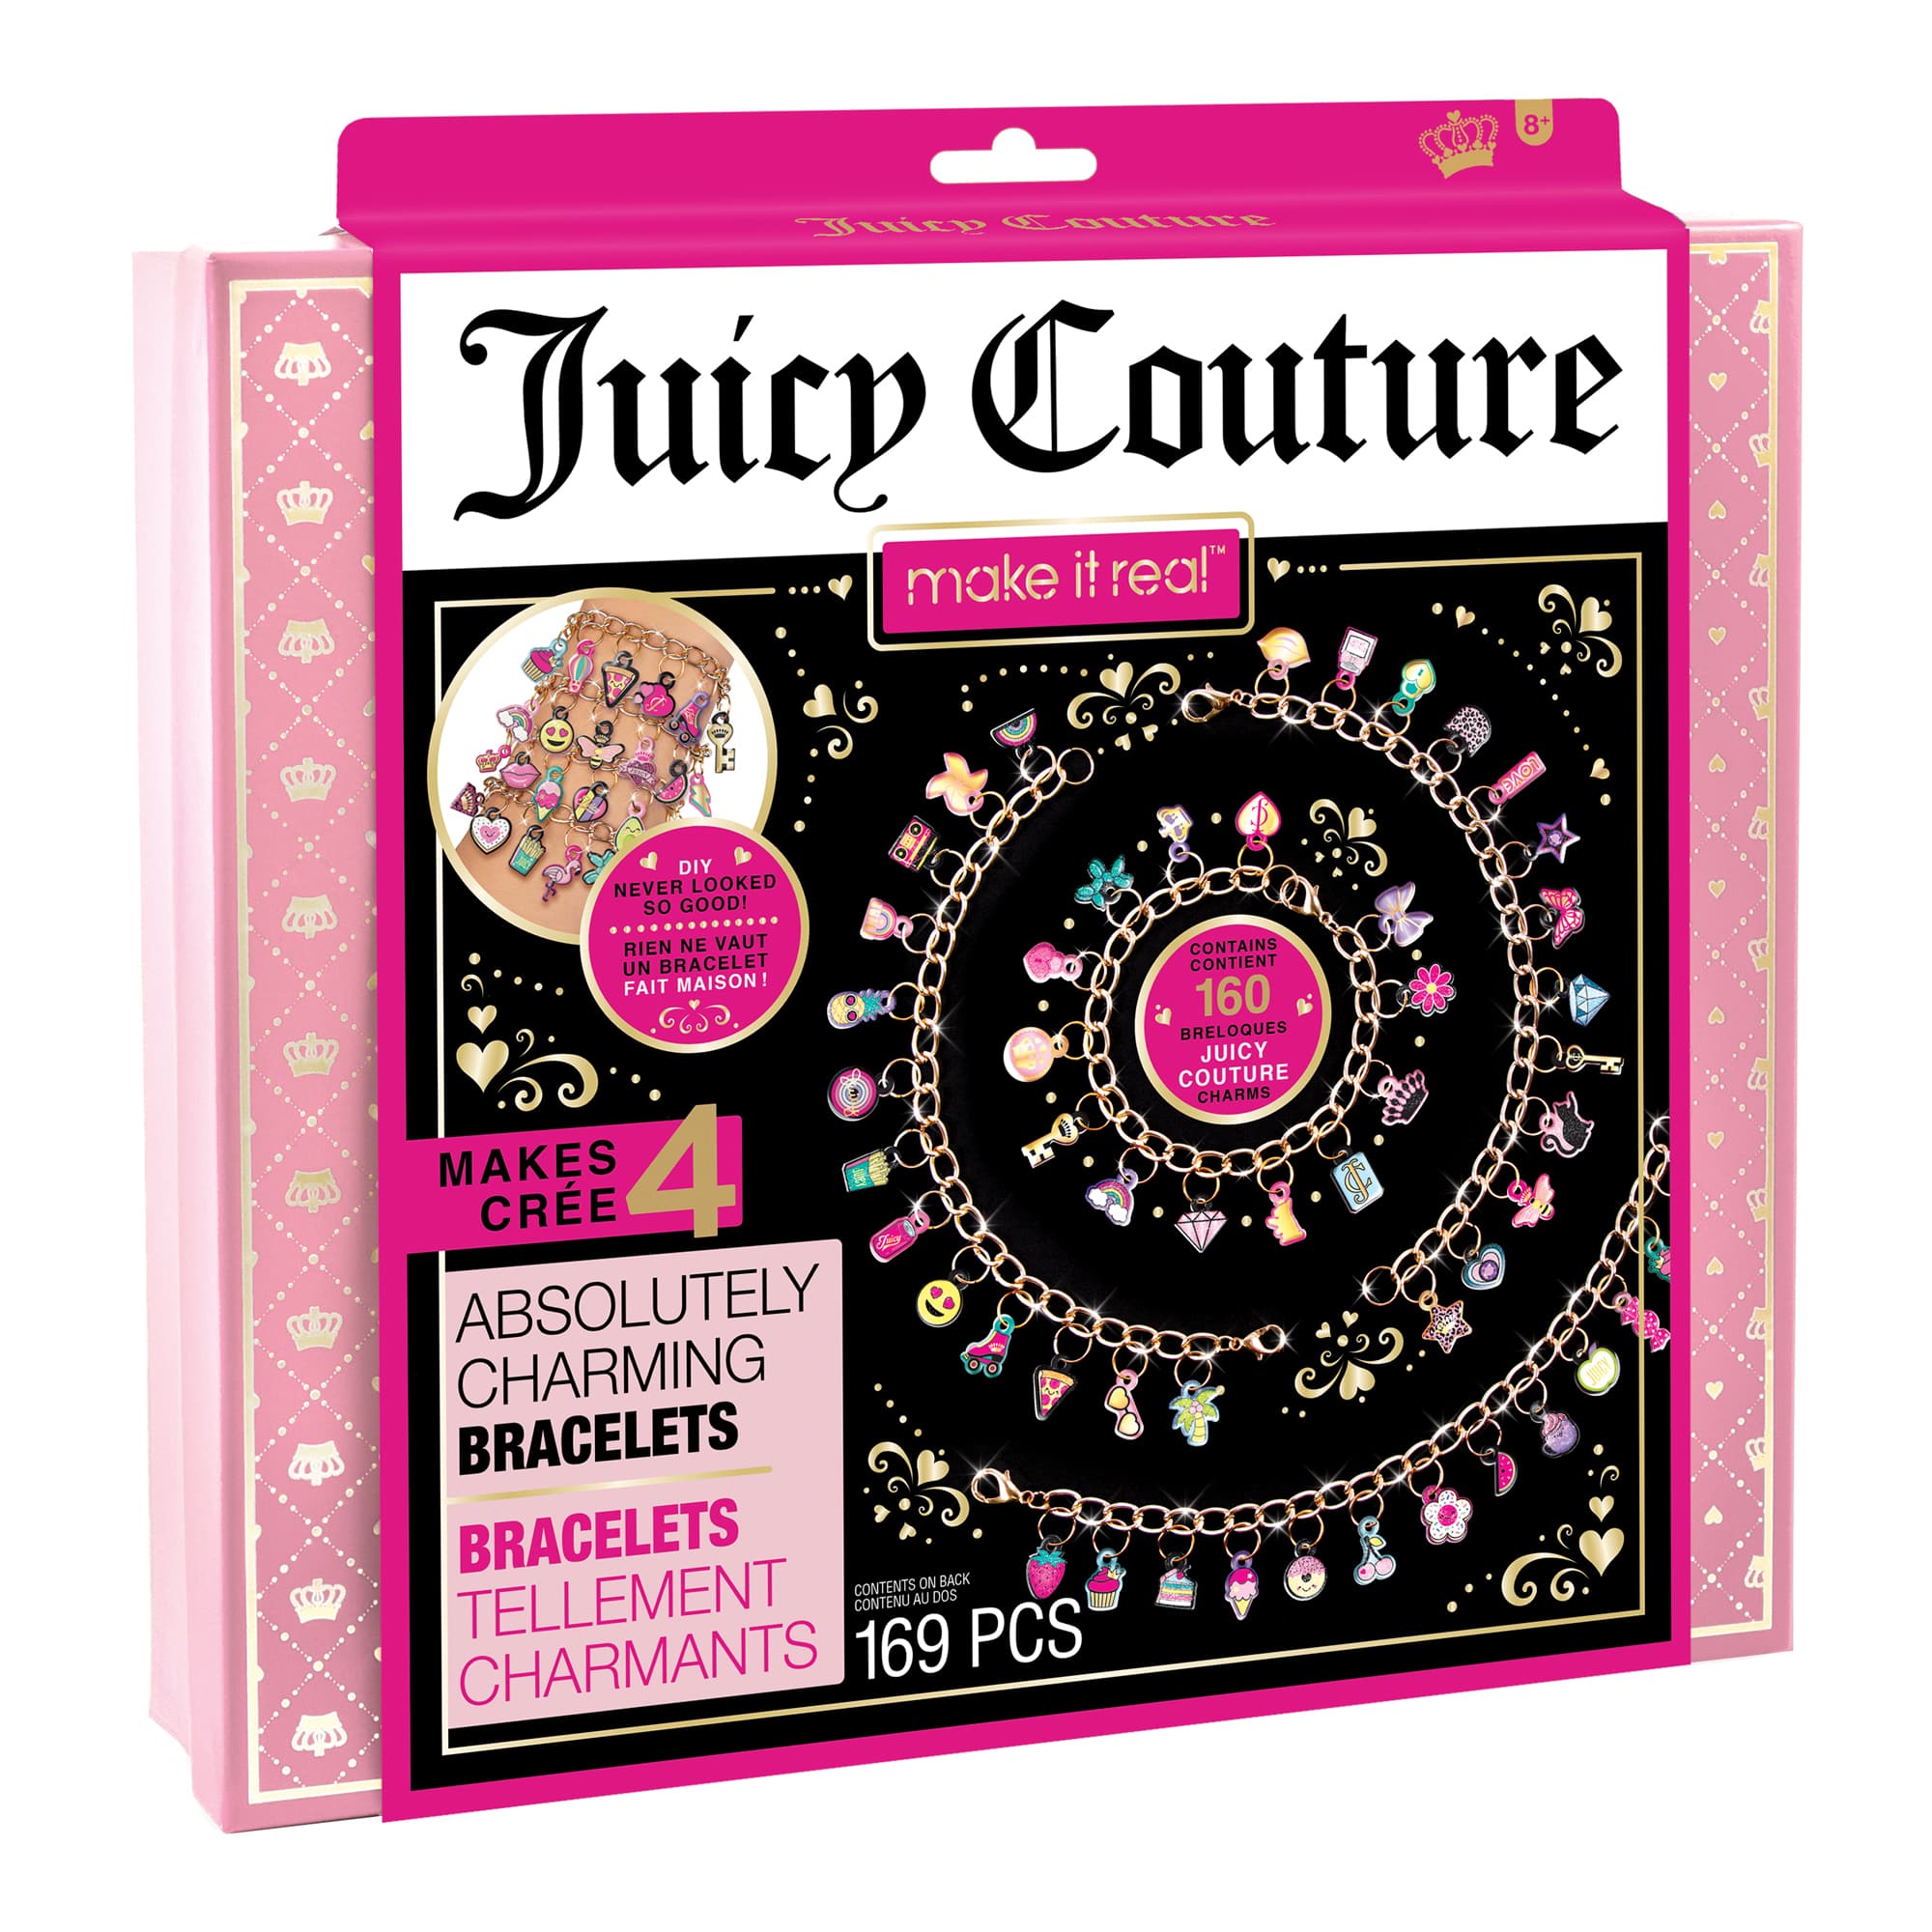 Juicy Couture Make it Real™ Perfectly Pink Bracelet Kit